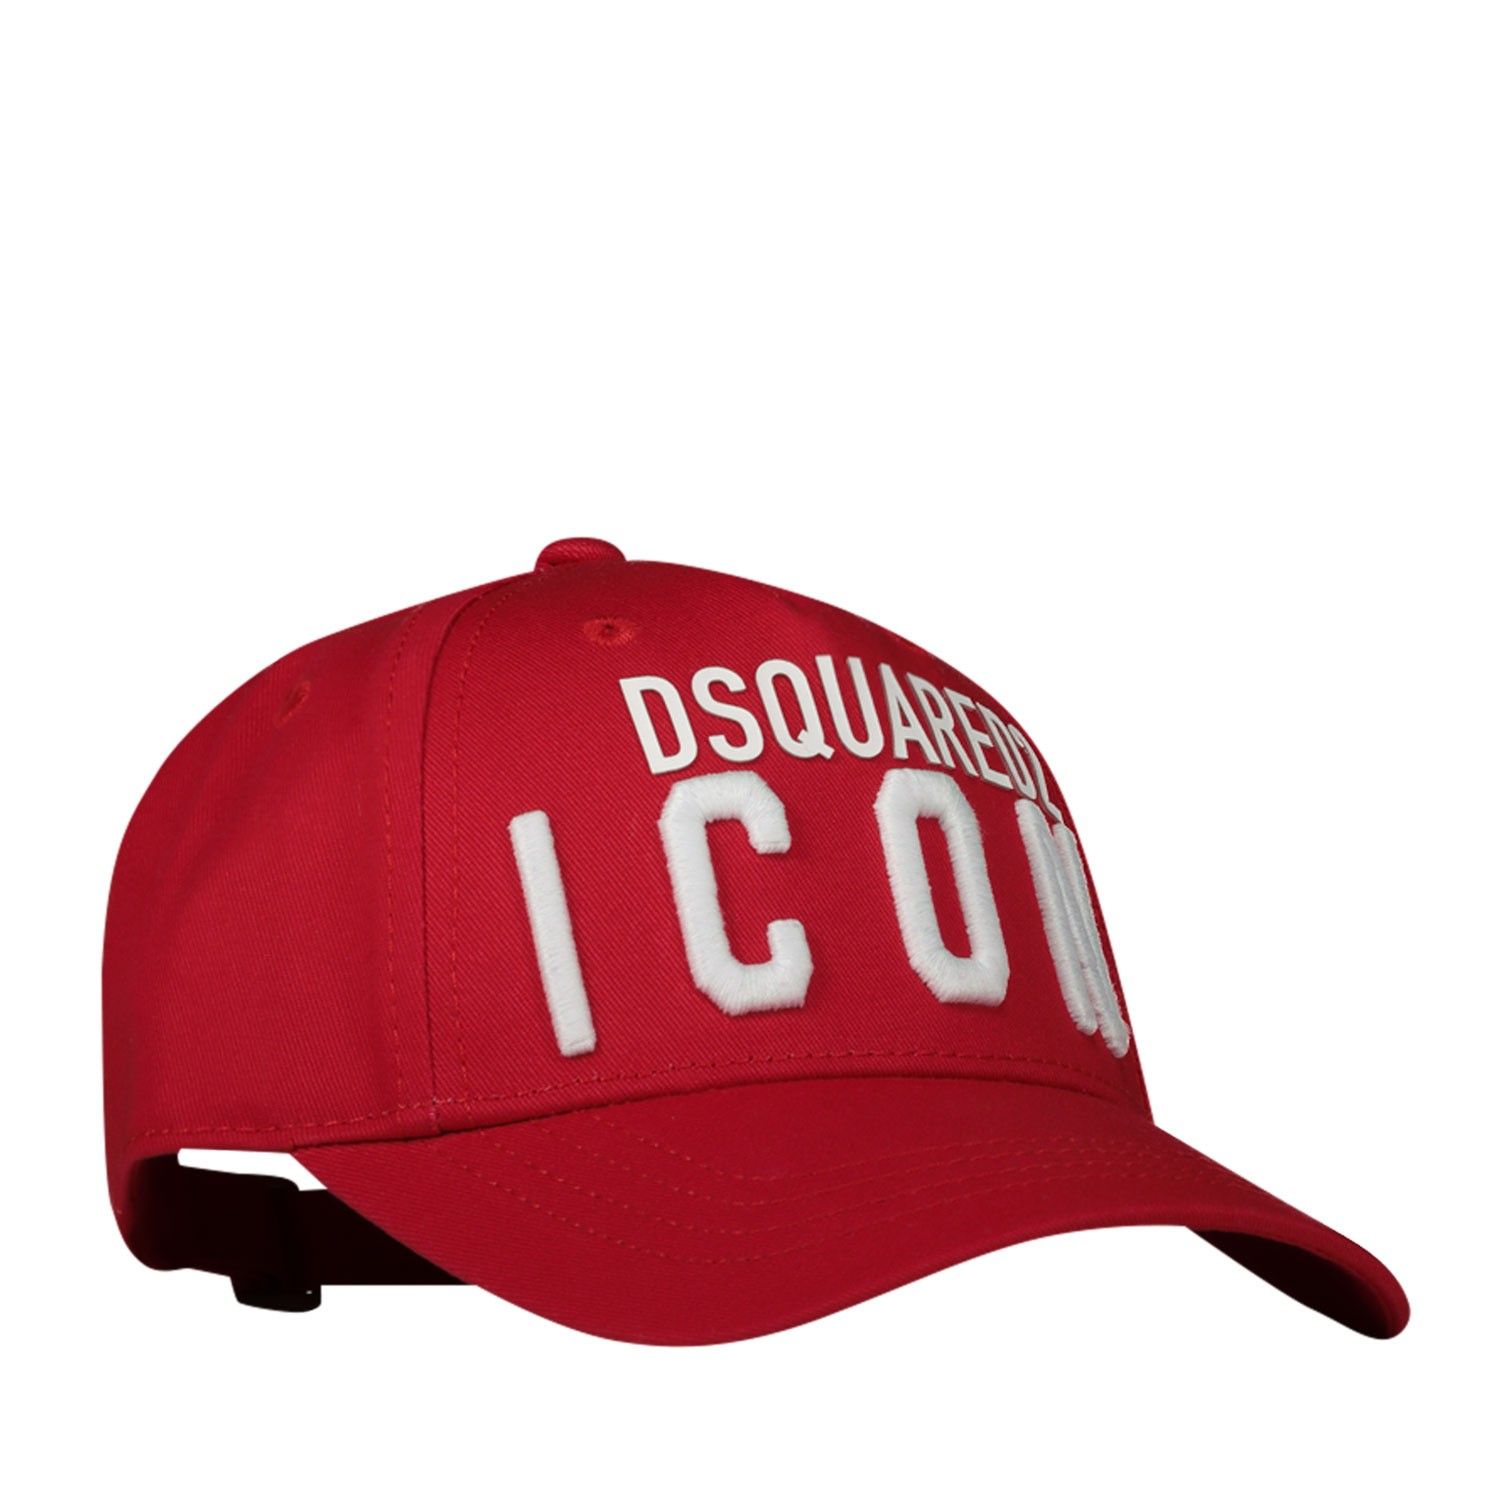 dsquared2 baby hat